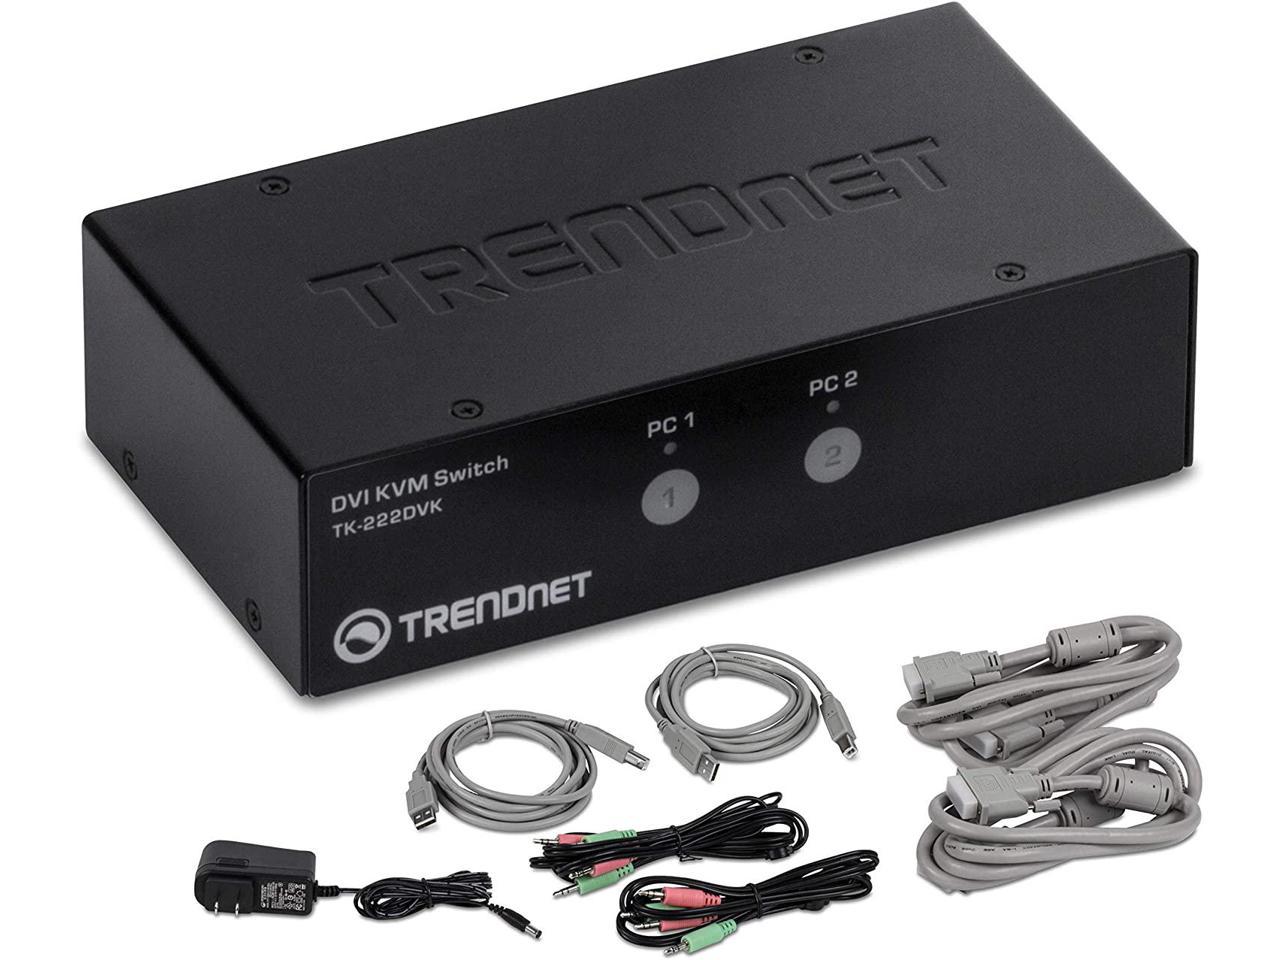 Windows/Linux/Mac 10.4 or Higher Manage Two PCs TRENDnet 2-Port USB KVM Switch and Cable Kit Hot-Keys TK-217i USB 2.0 Auto-Scan 